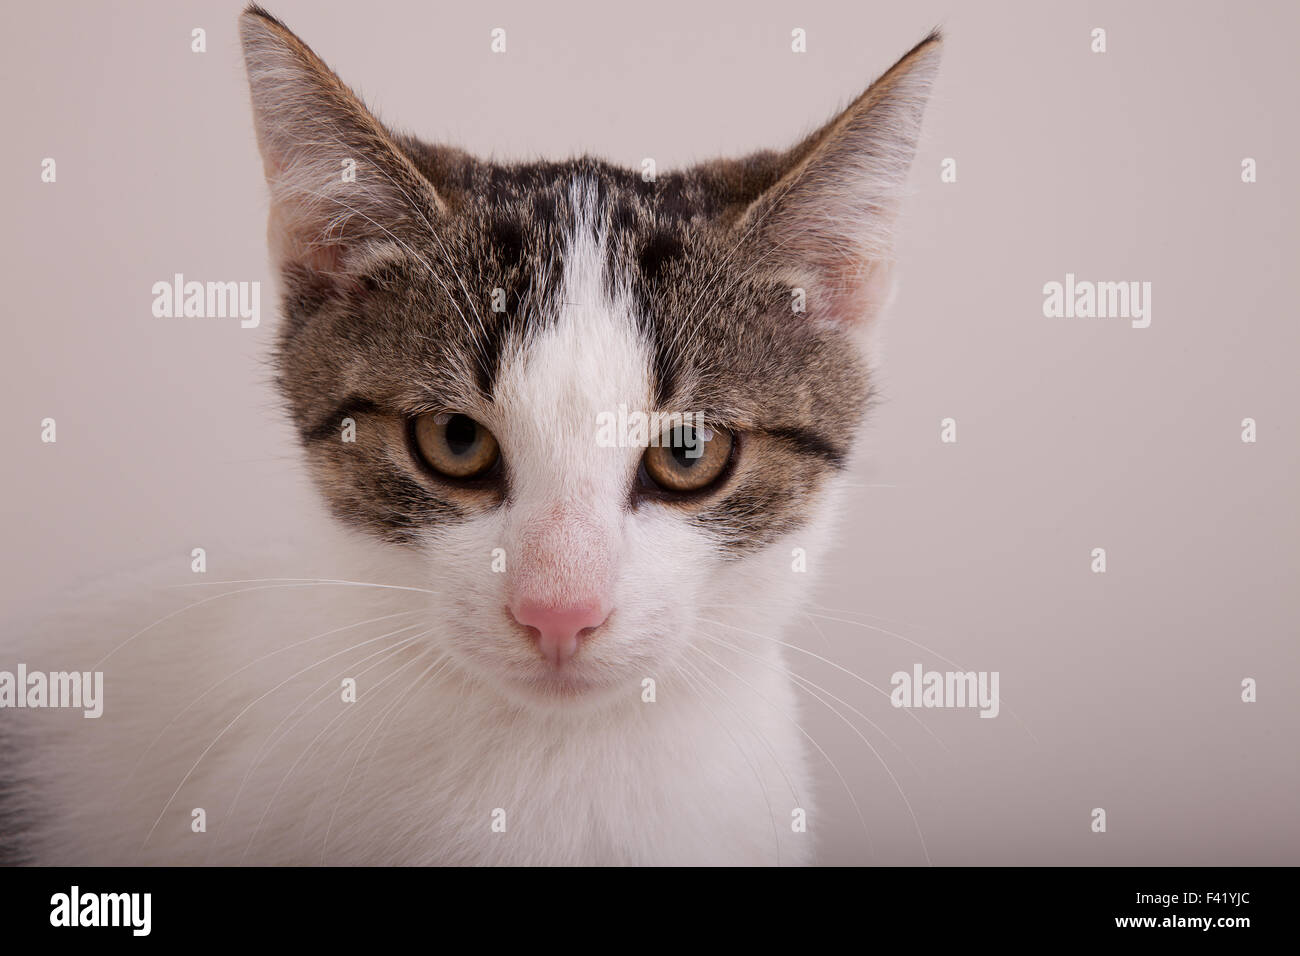 Young cat, white tabby, male, portrait Stock Photo